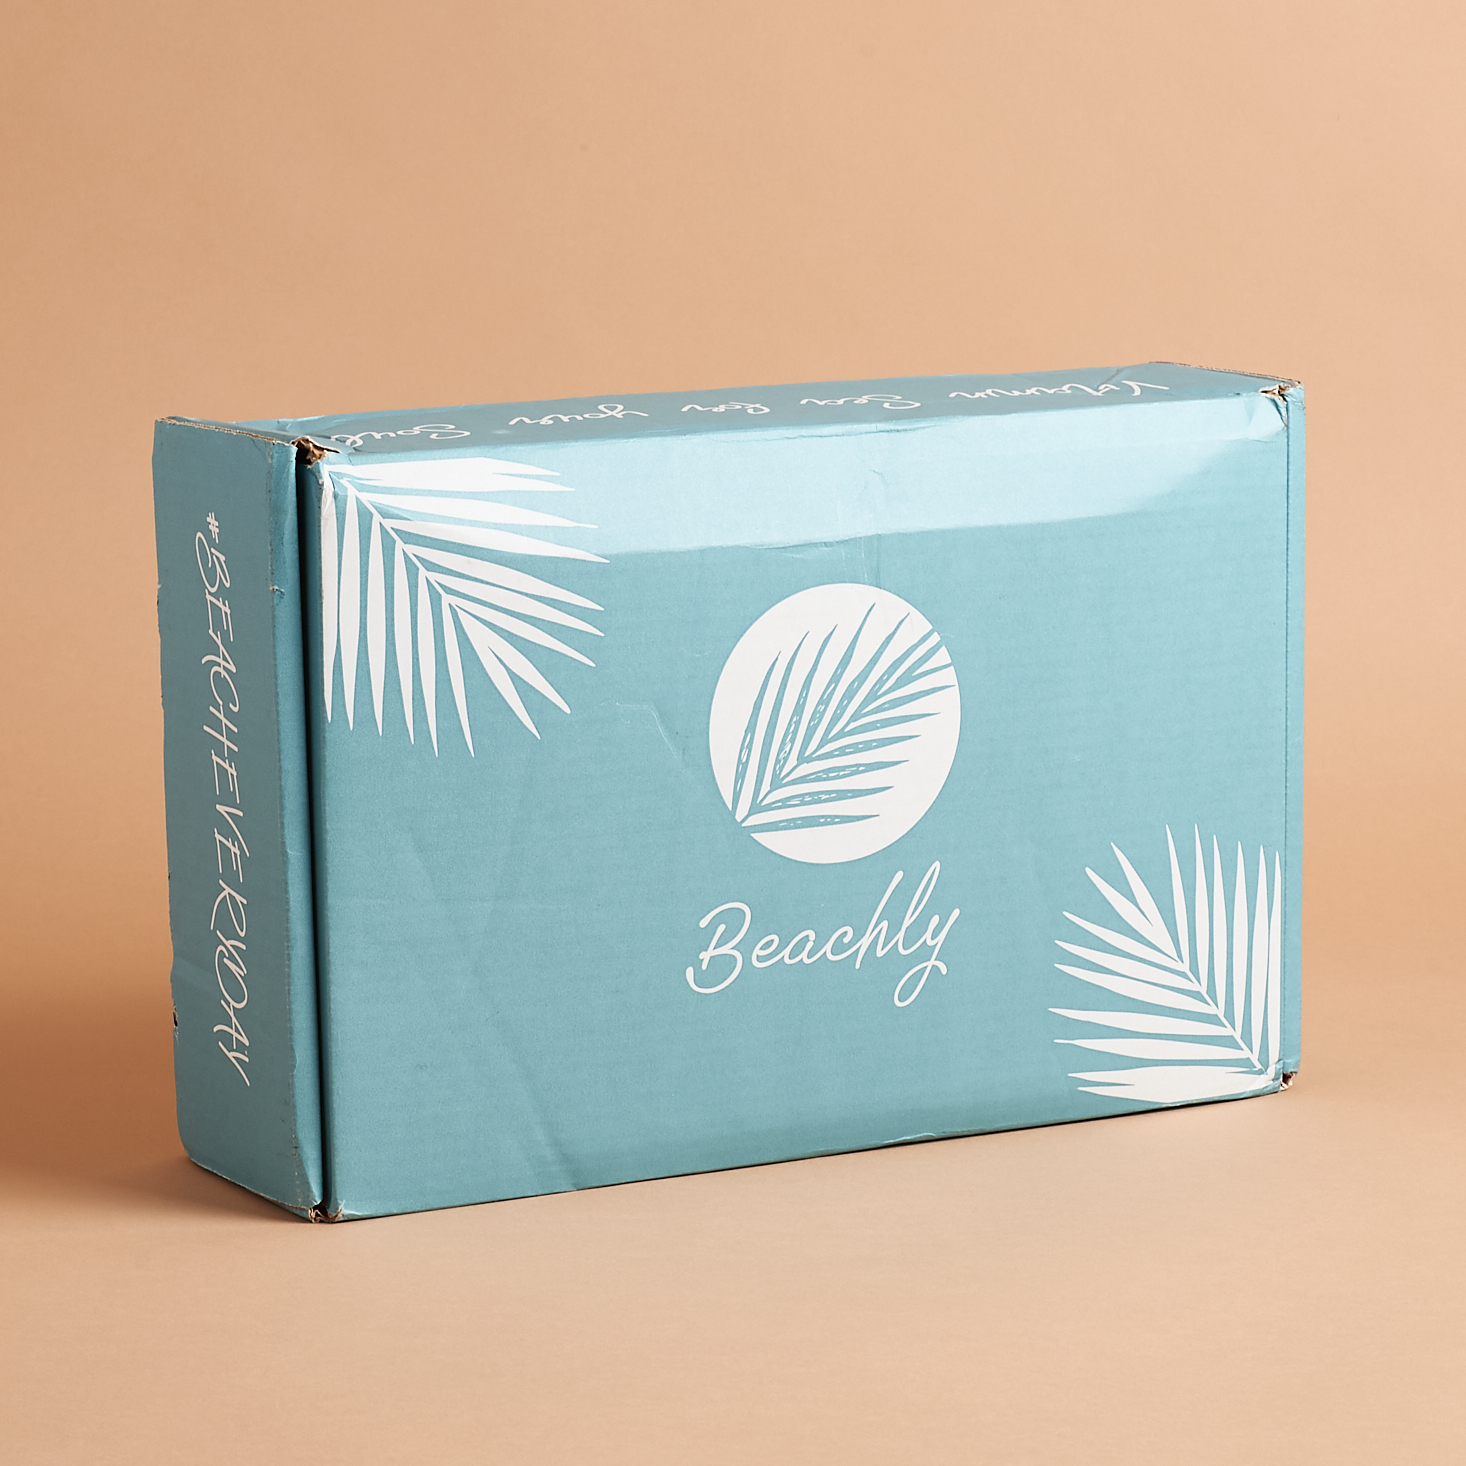 Beachly Winter 2020 Box Available Now + Full Spoilers! | MSA